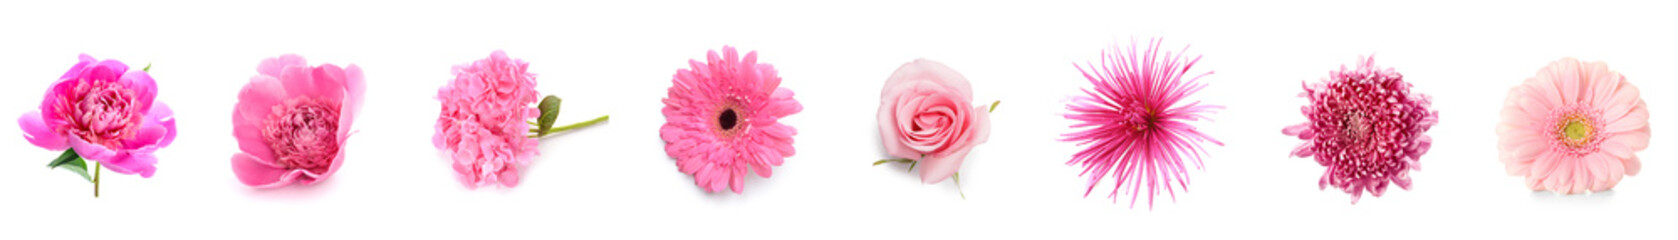 Set of different beautiful pink flowers isolated on white